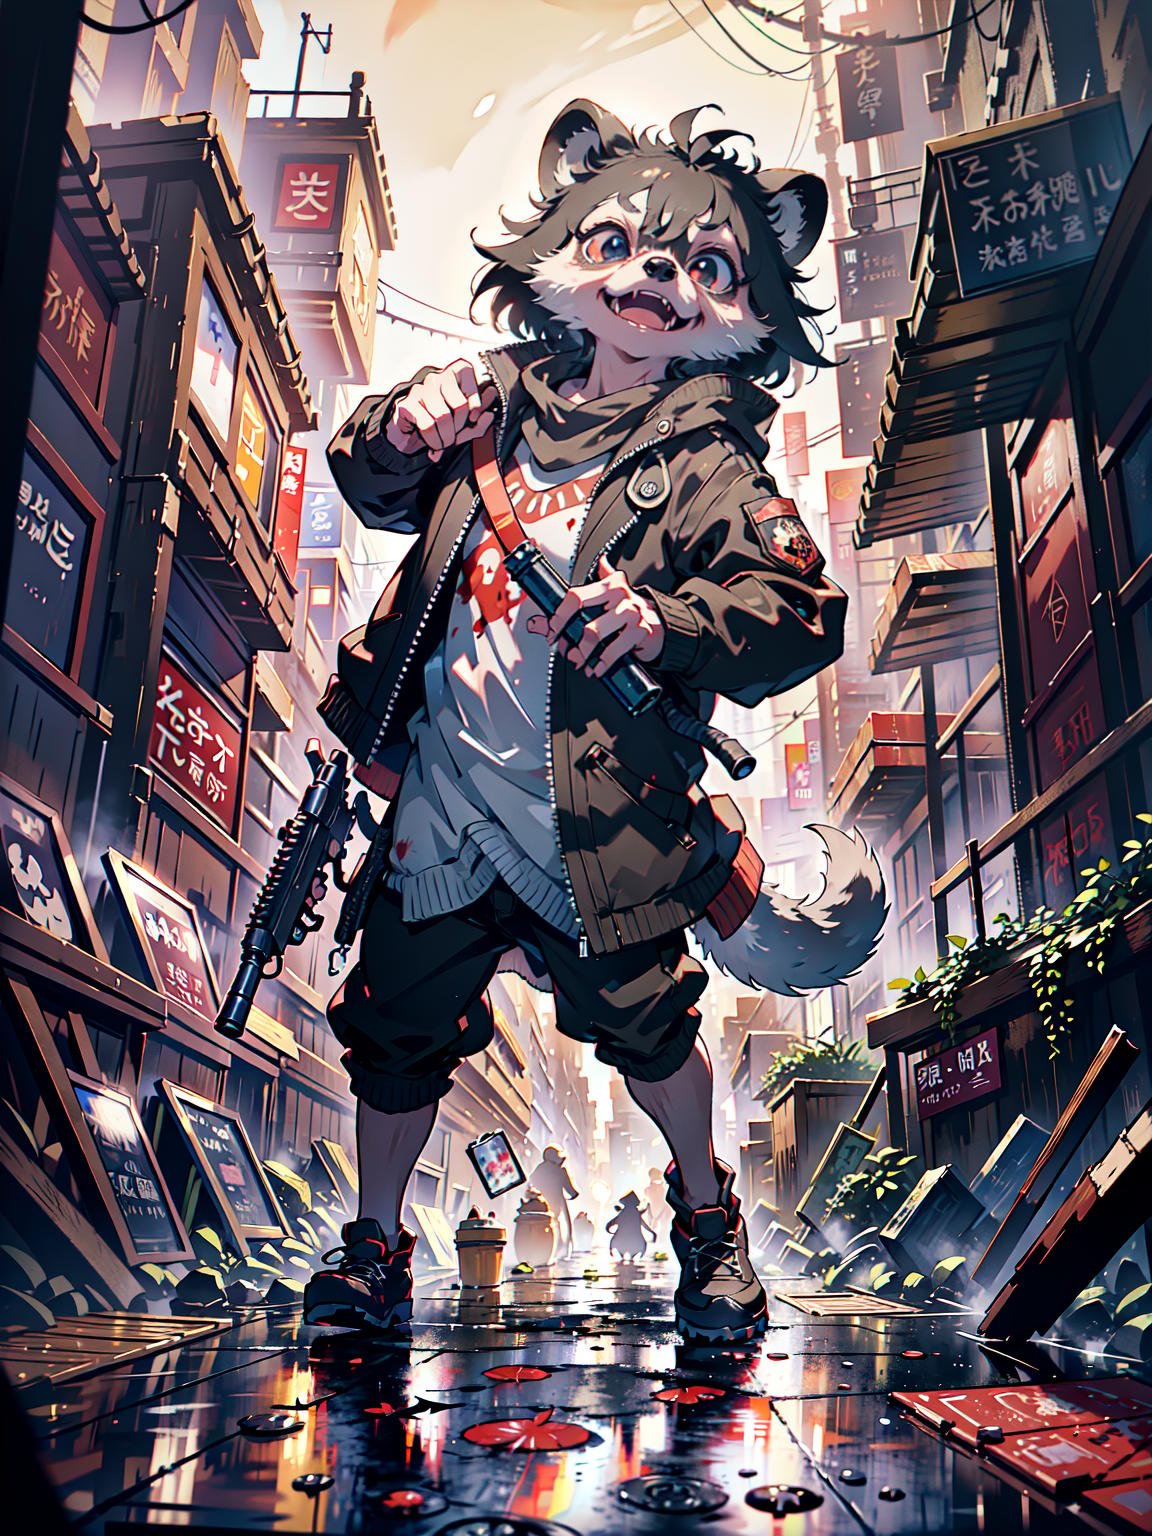  master piece, best quality, ultra detailed, highres, 4k.8k, a two dimensional raccoon dog, holding a firearm, surrounded by splattering blood, serious, BREAK A tragic, a dark alleyway, firearm, blood splatters, BREAK ominous, gritty, intense, dramatic, realistic, Cu73Cre4ture